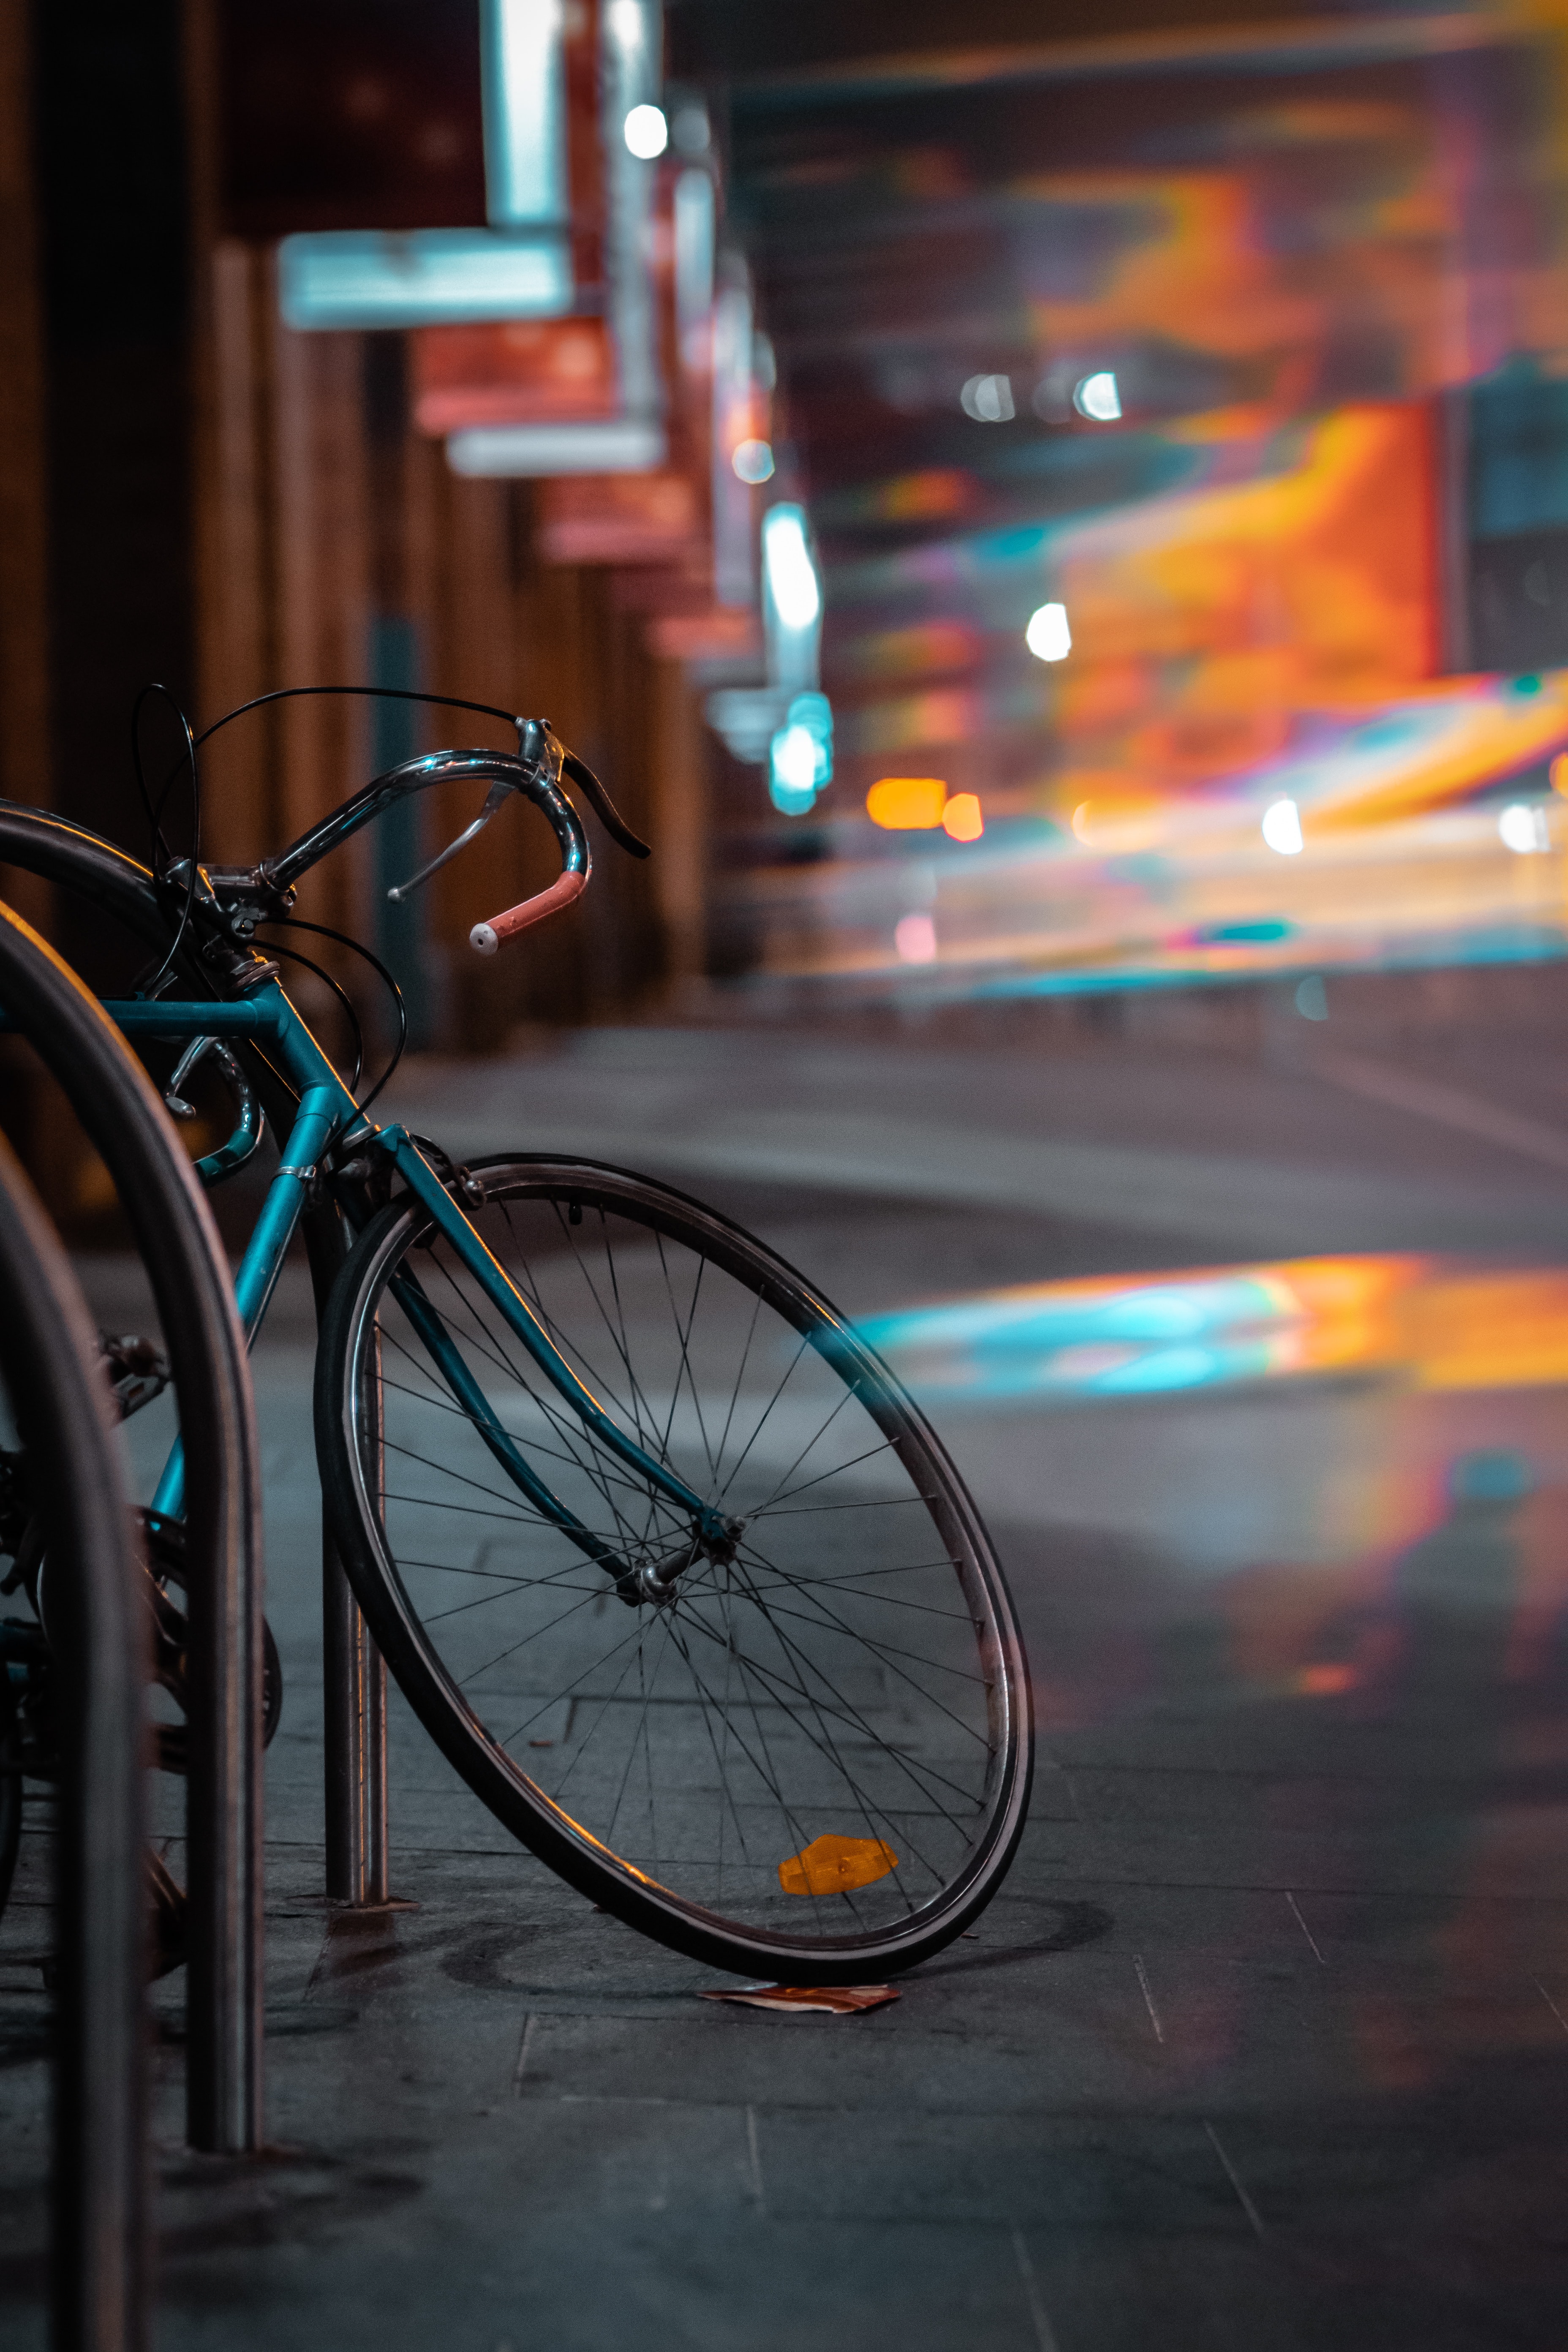 blur, miscellaneous, bicycle, transport, glare, miscellanea, smooth, evening, wheels